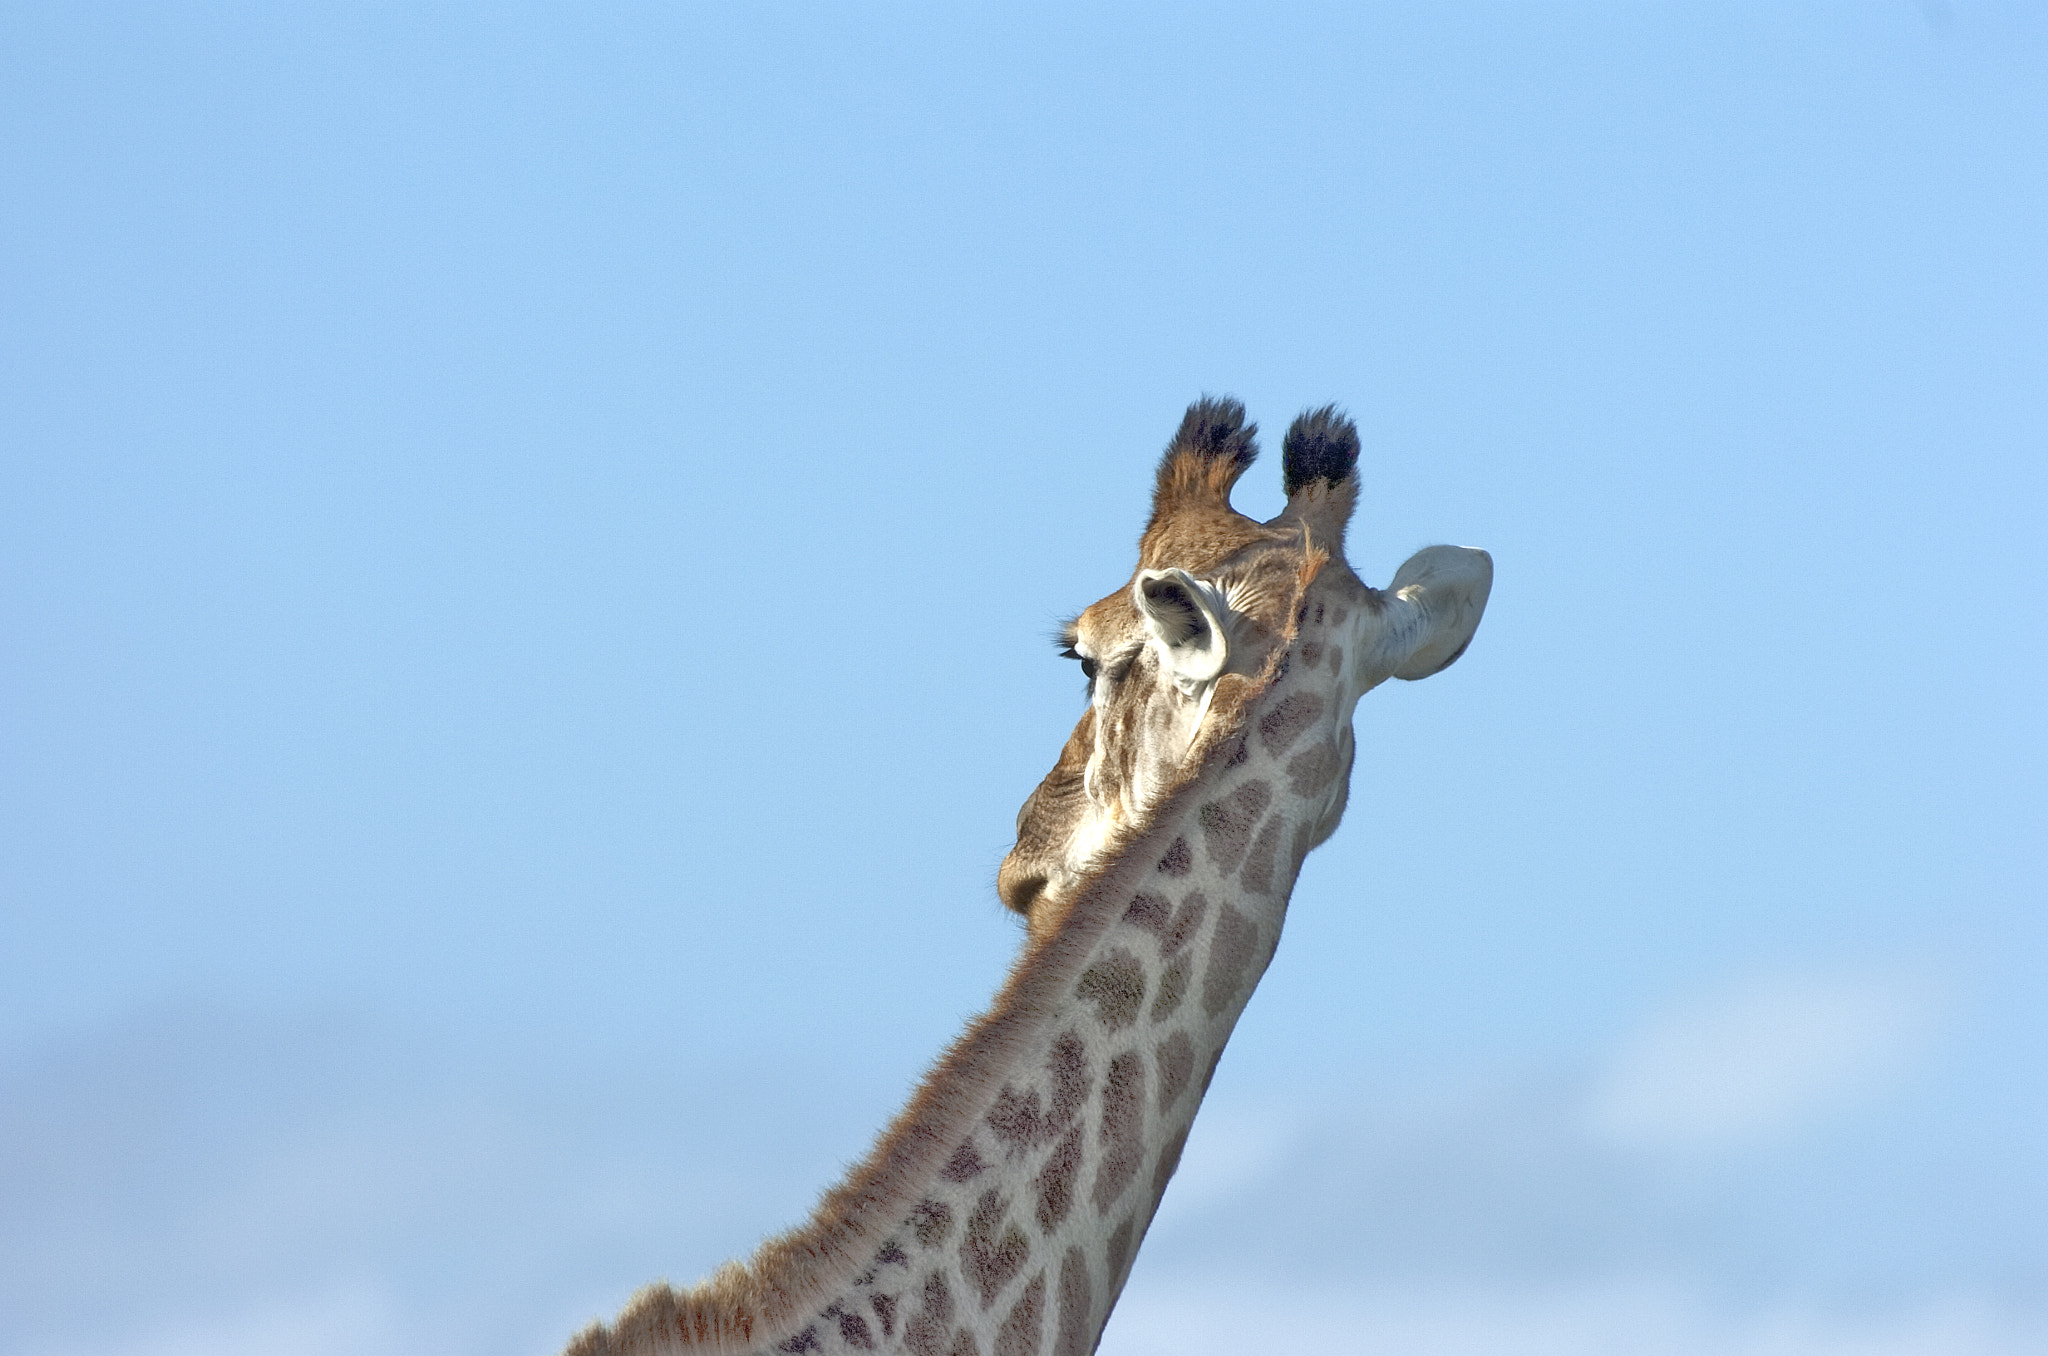 Nikon D2Hs sample photo. Giraffe twisting round - face in profile photography